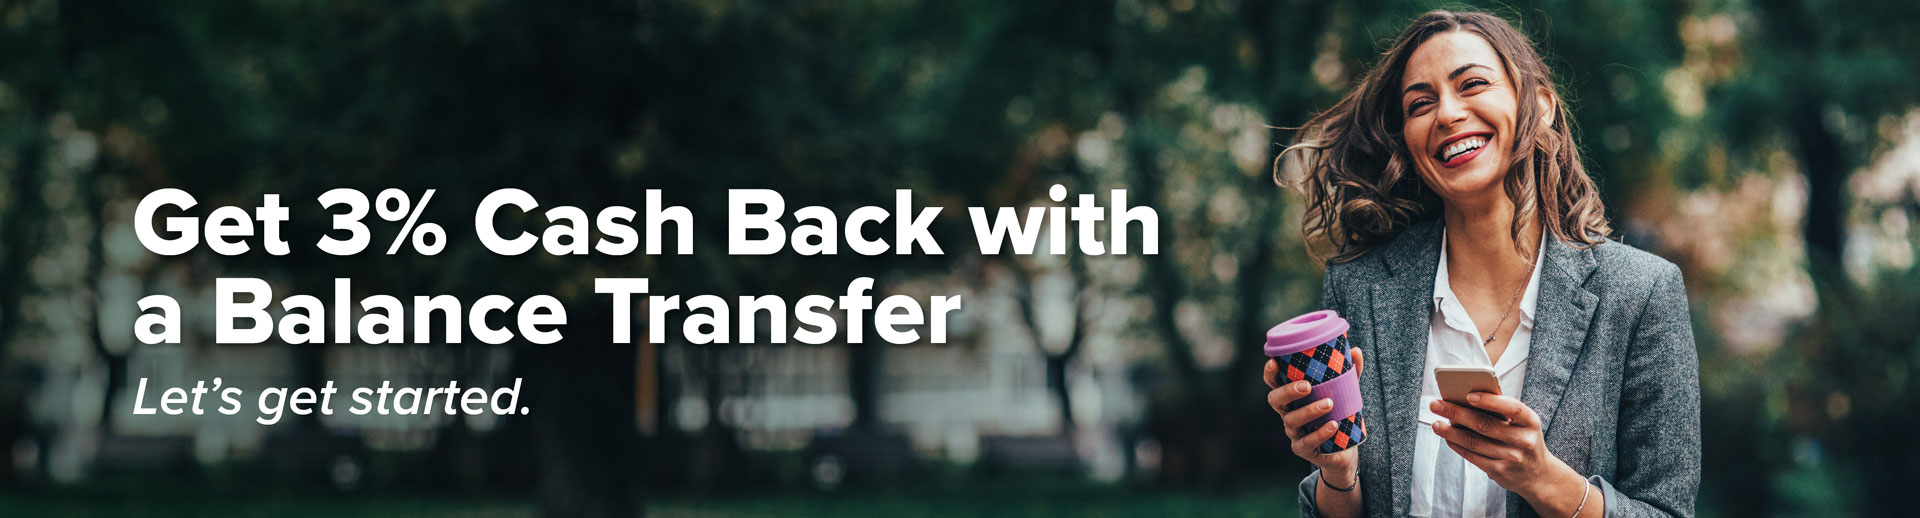 Get 3 percent Cash Back with a Balance Transfer. Let's get started.